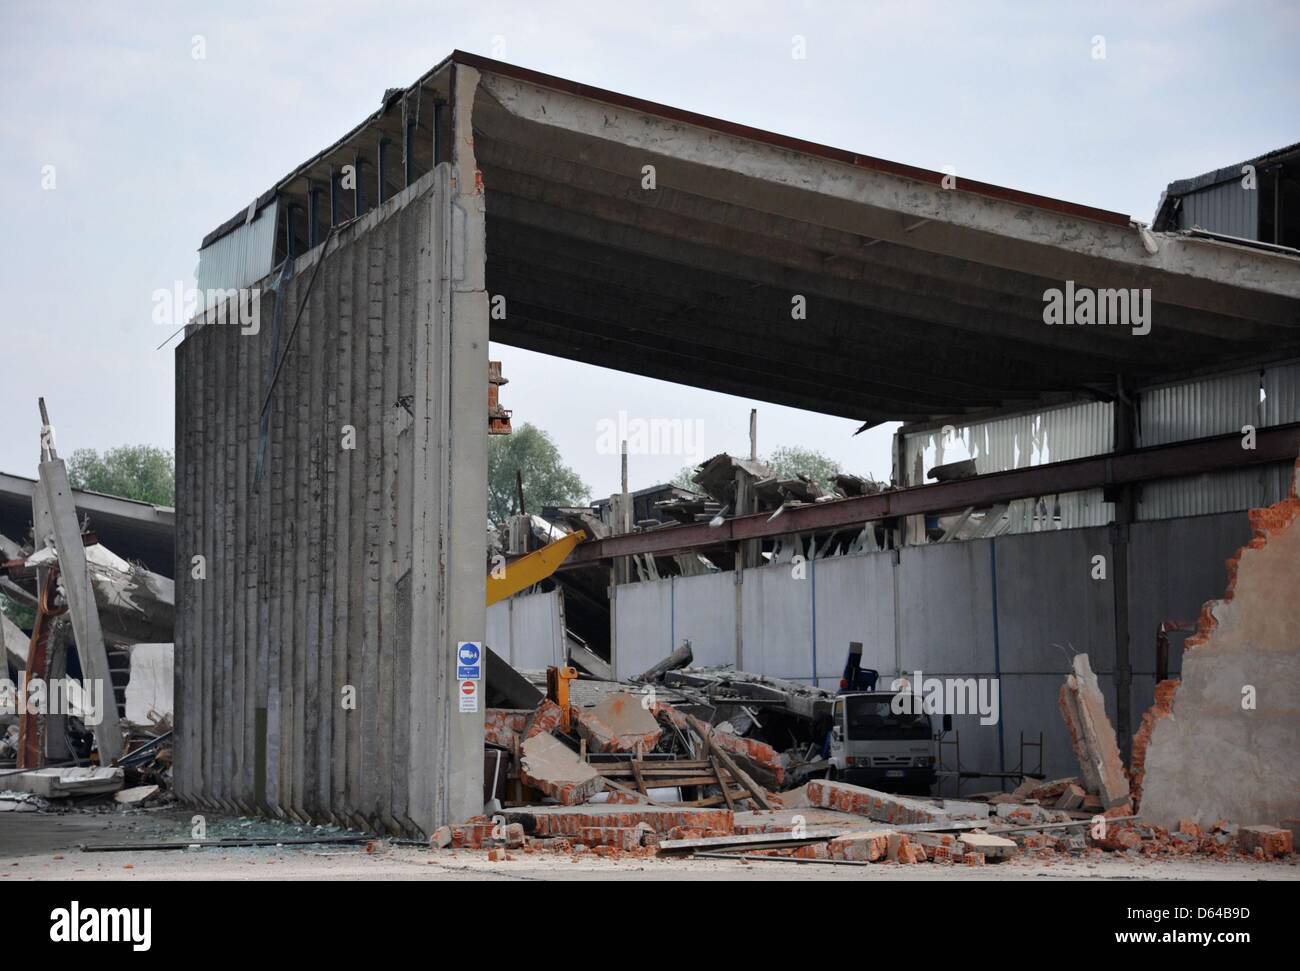 A truck is covered in debris in a collapsed hall in Mirabello, Italy, 23 May 2012. An earthquake measuring 6.0 on the Richter scale shook the Italian region Emilia-Romagna early in the morning on 20 May 2012. Photo: Nicolas Armer Stock Photo